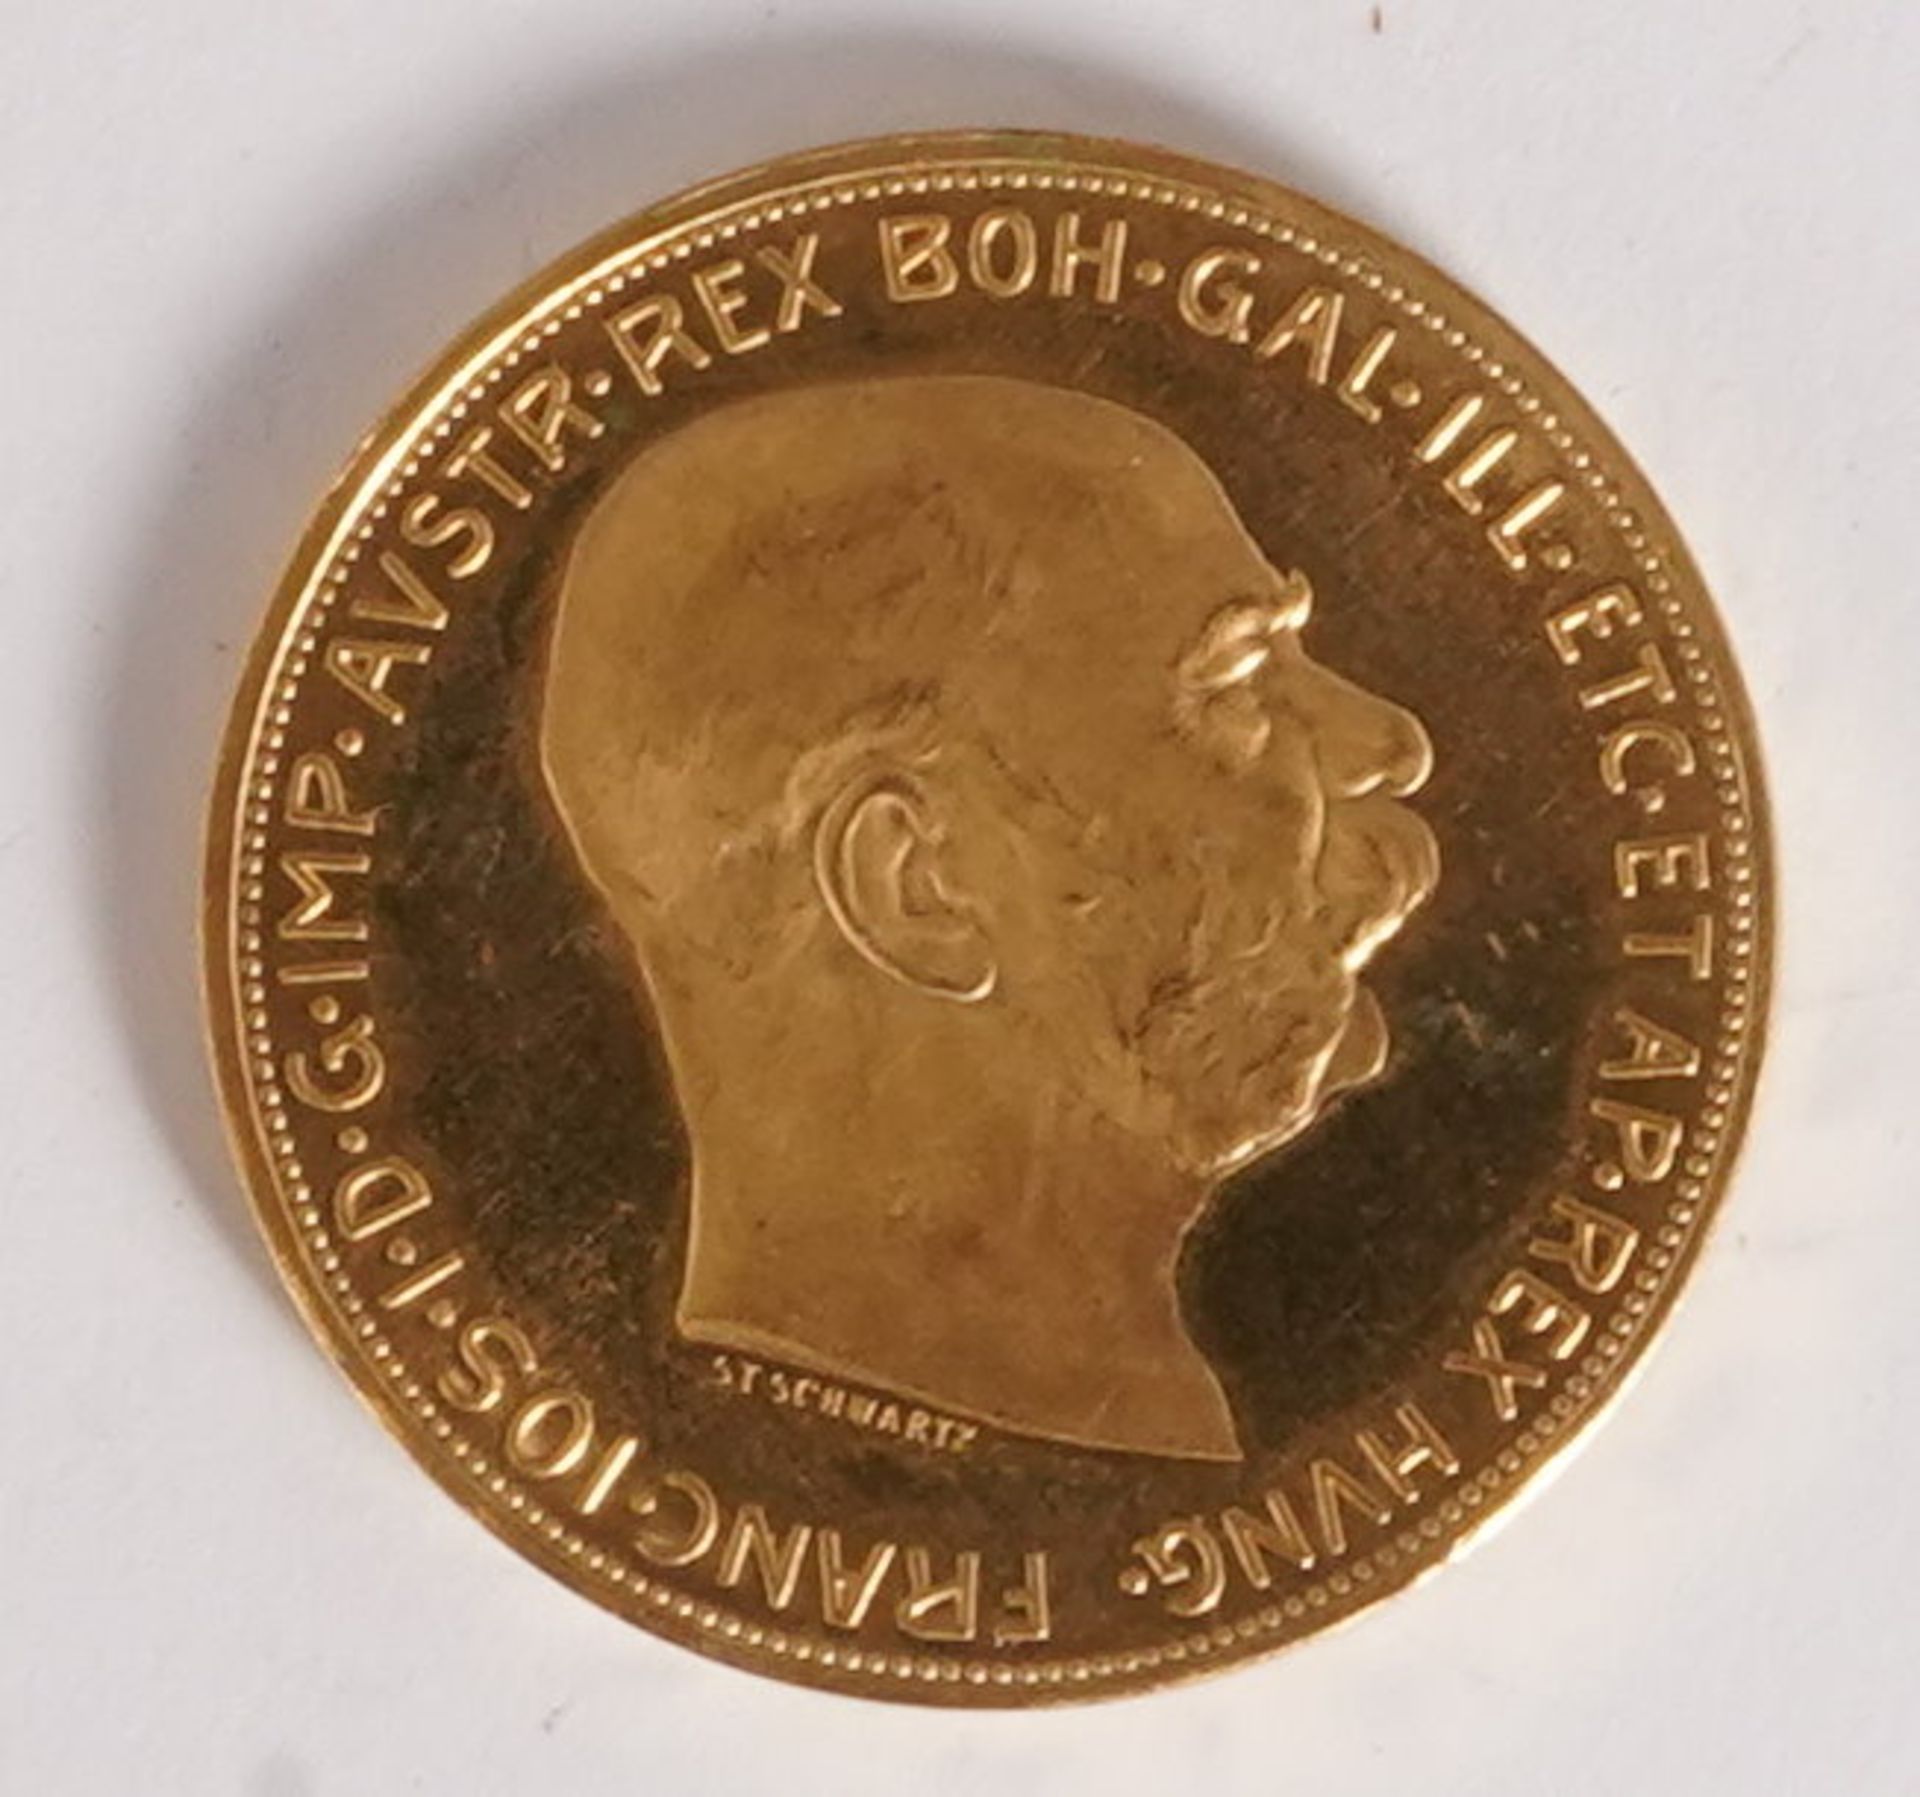 Gold coin 100 crowns